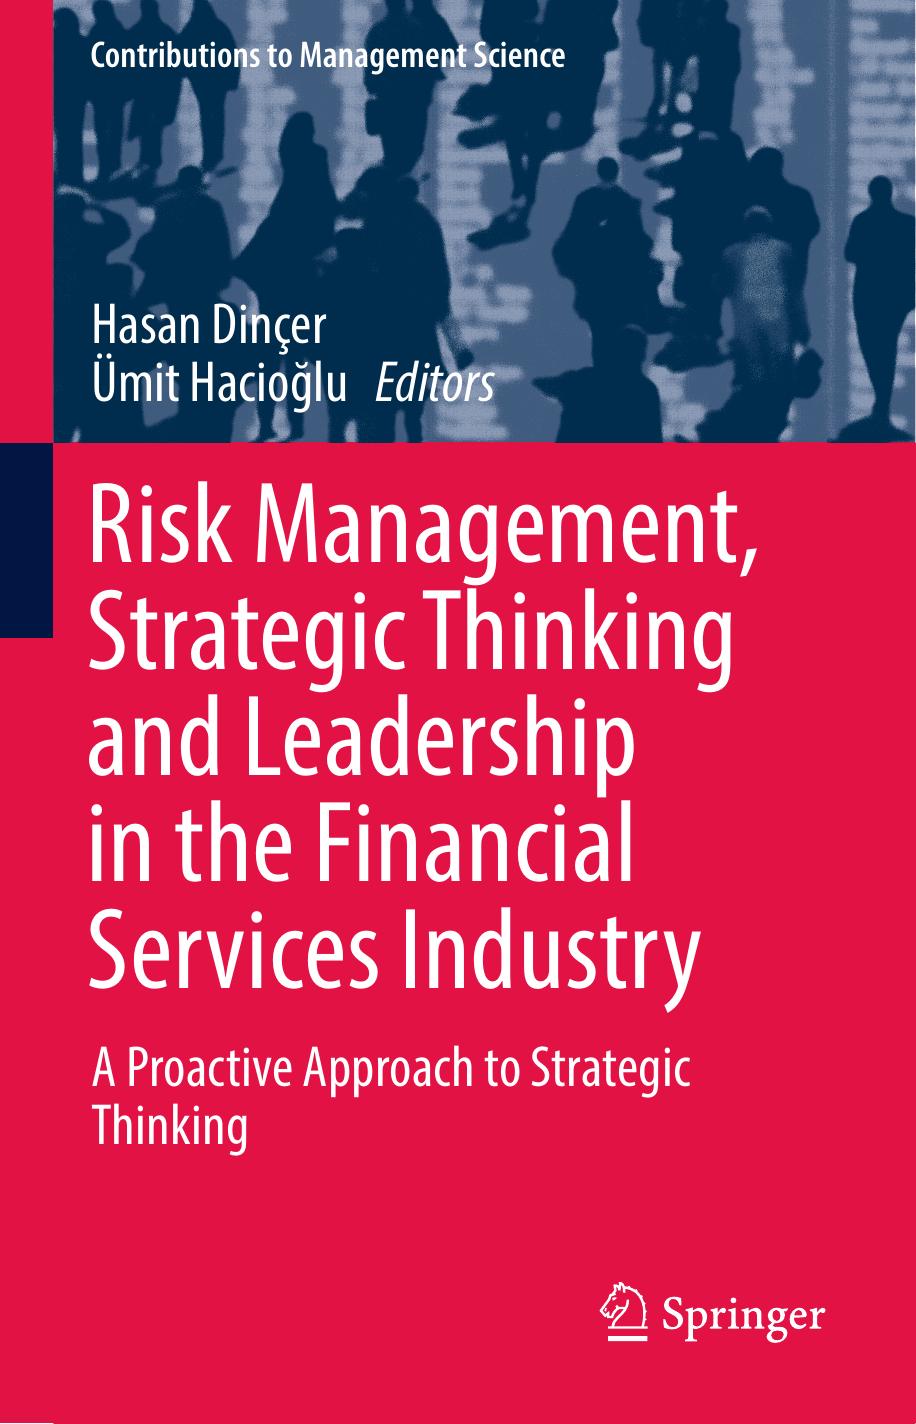 Risk Management, Strategic Thinking and Leadership in the Financial Services Industry 2017.pdf